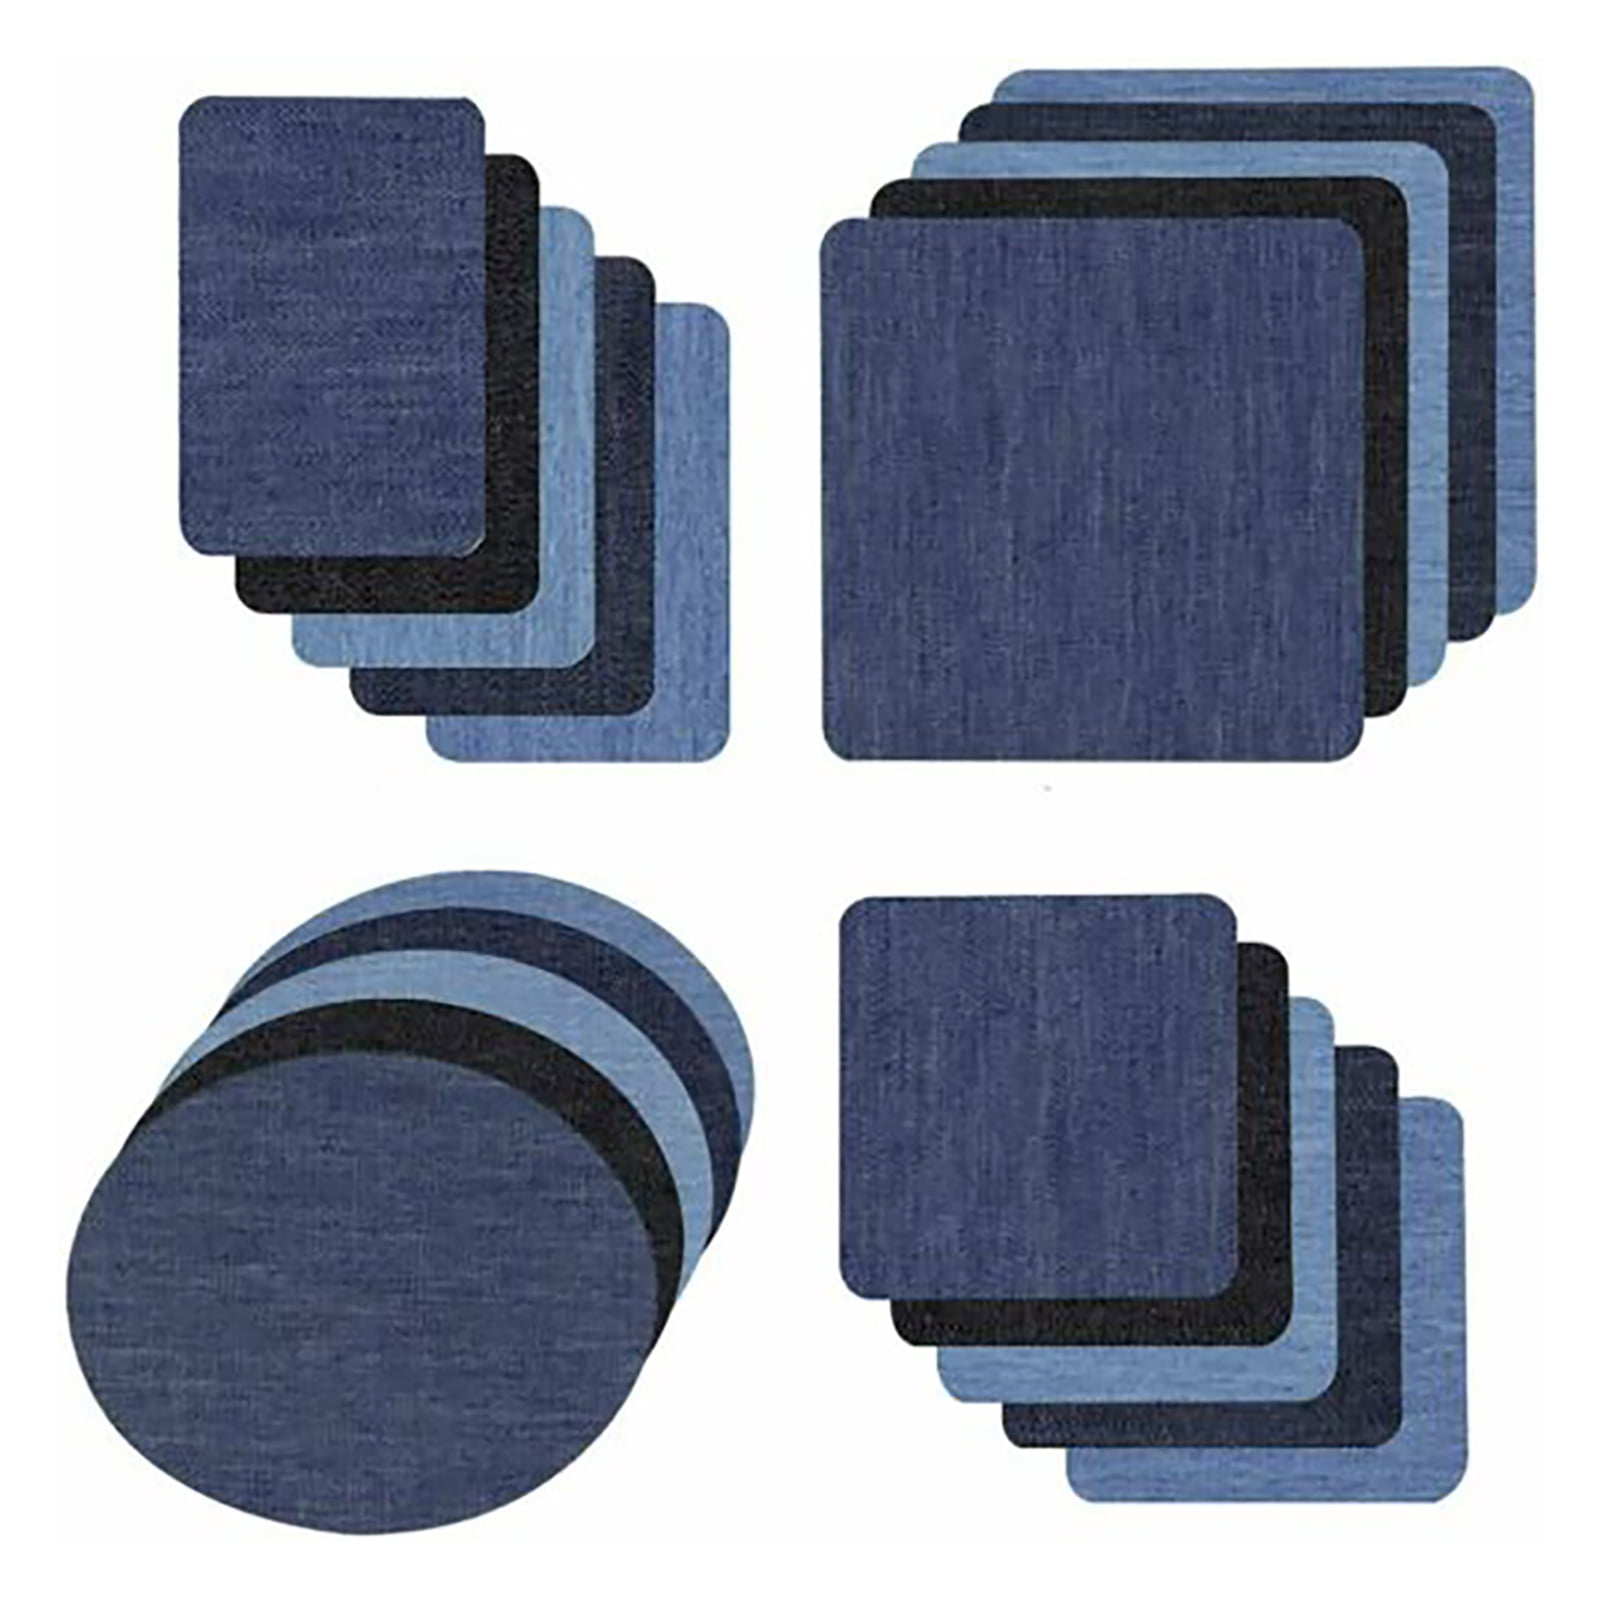 Blue Jean Patches | Iron On Patches for Jeans | Denim Jean Patches ...